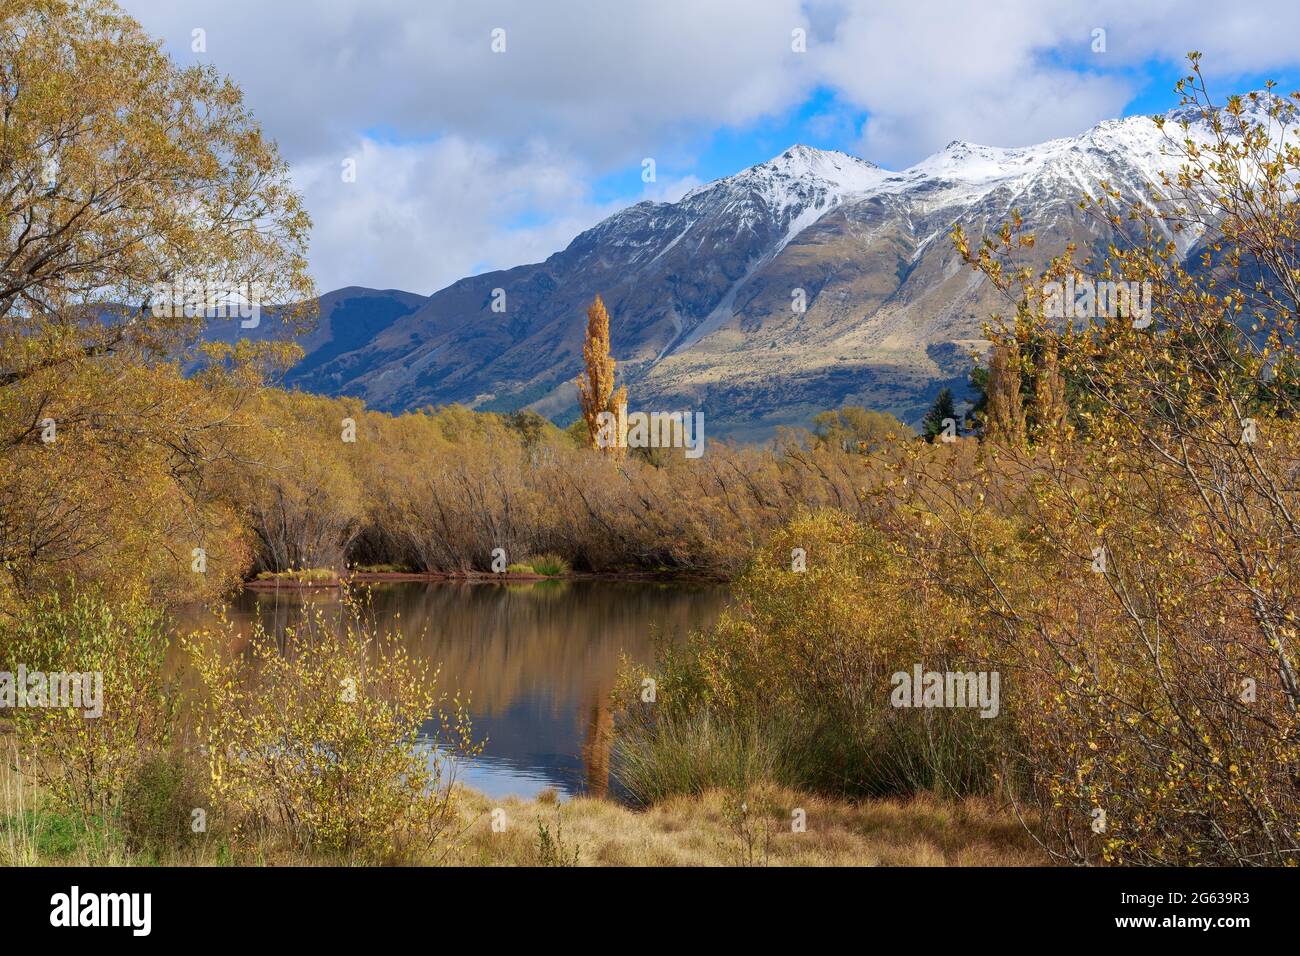 Autumn landscape in the Glenorchy Lagoon, a scenic wetland in the South Island of New Zealand Stock Photo